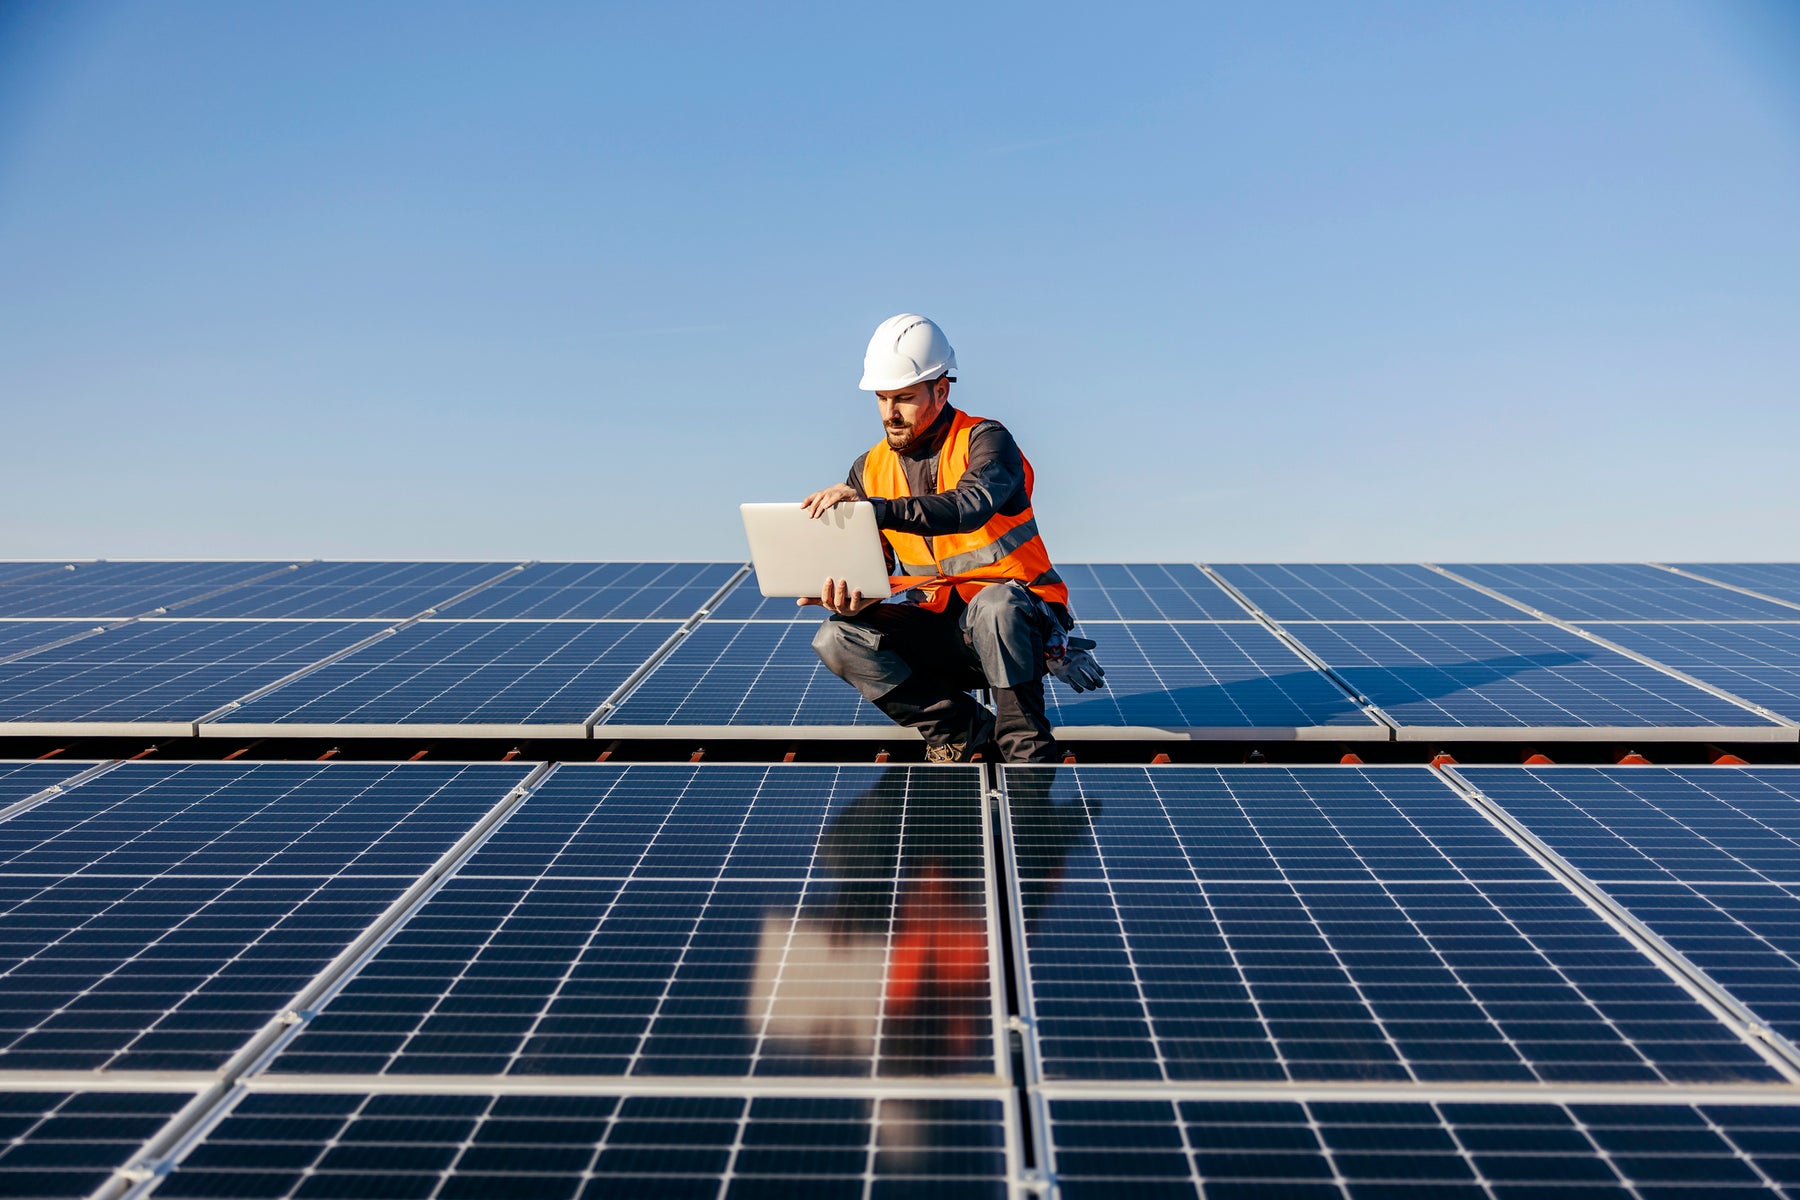 A complete step by step guide to installing solar panels on your home.